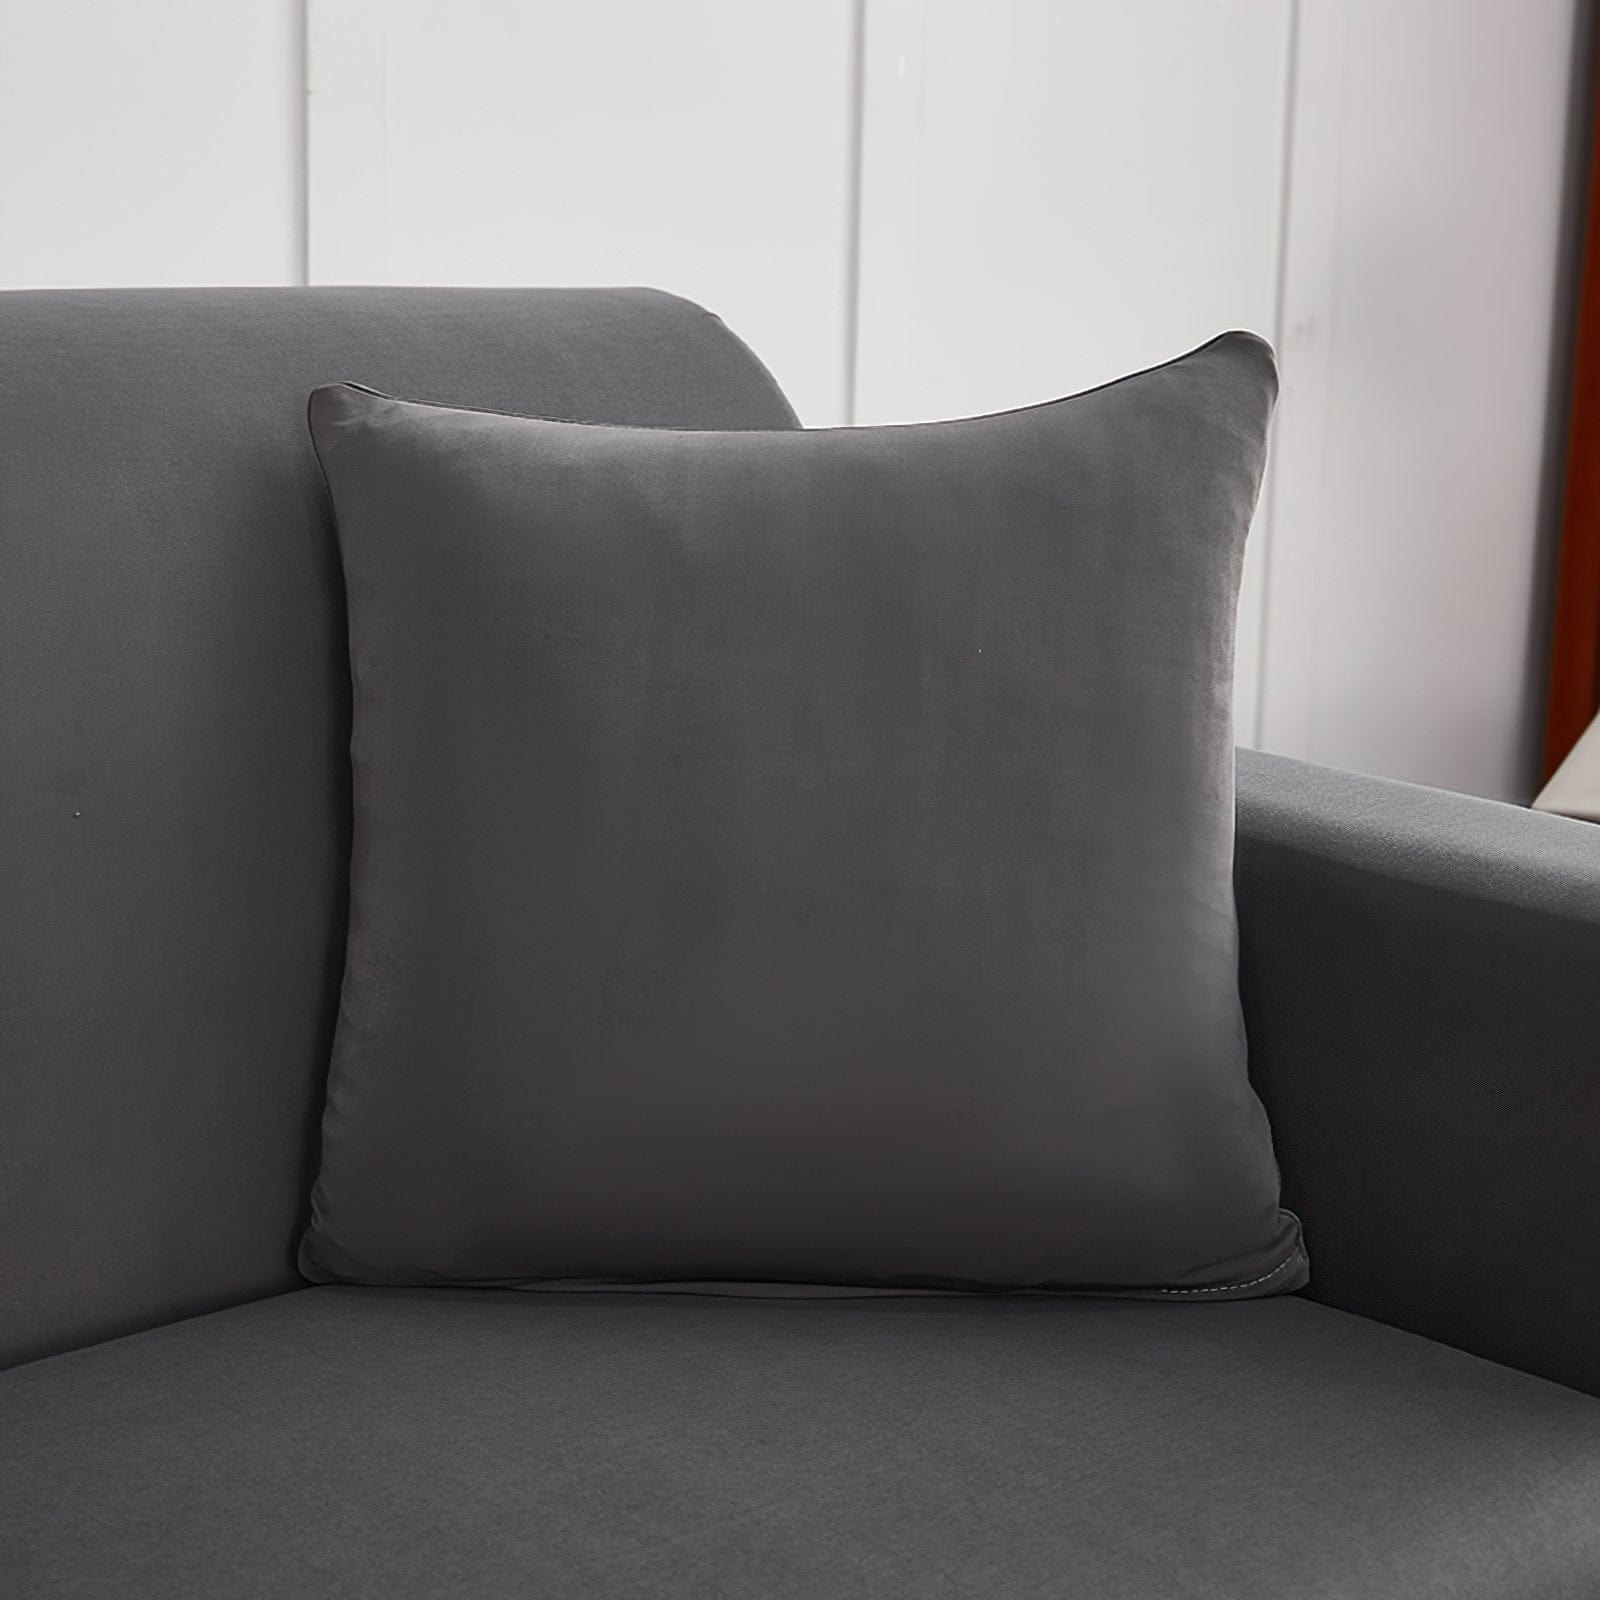 Dark grey - TWO PIECES - EXPANDABLE CUSHION COVERS 18" X 18" (45 CM X 45 CM)